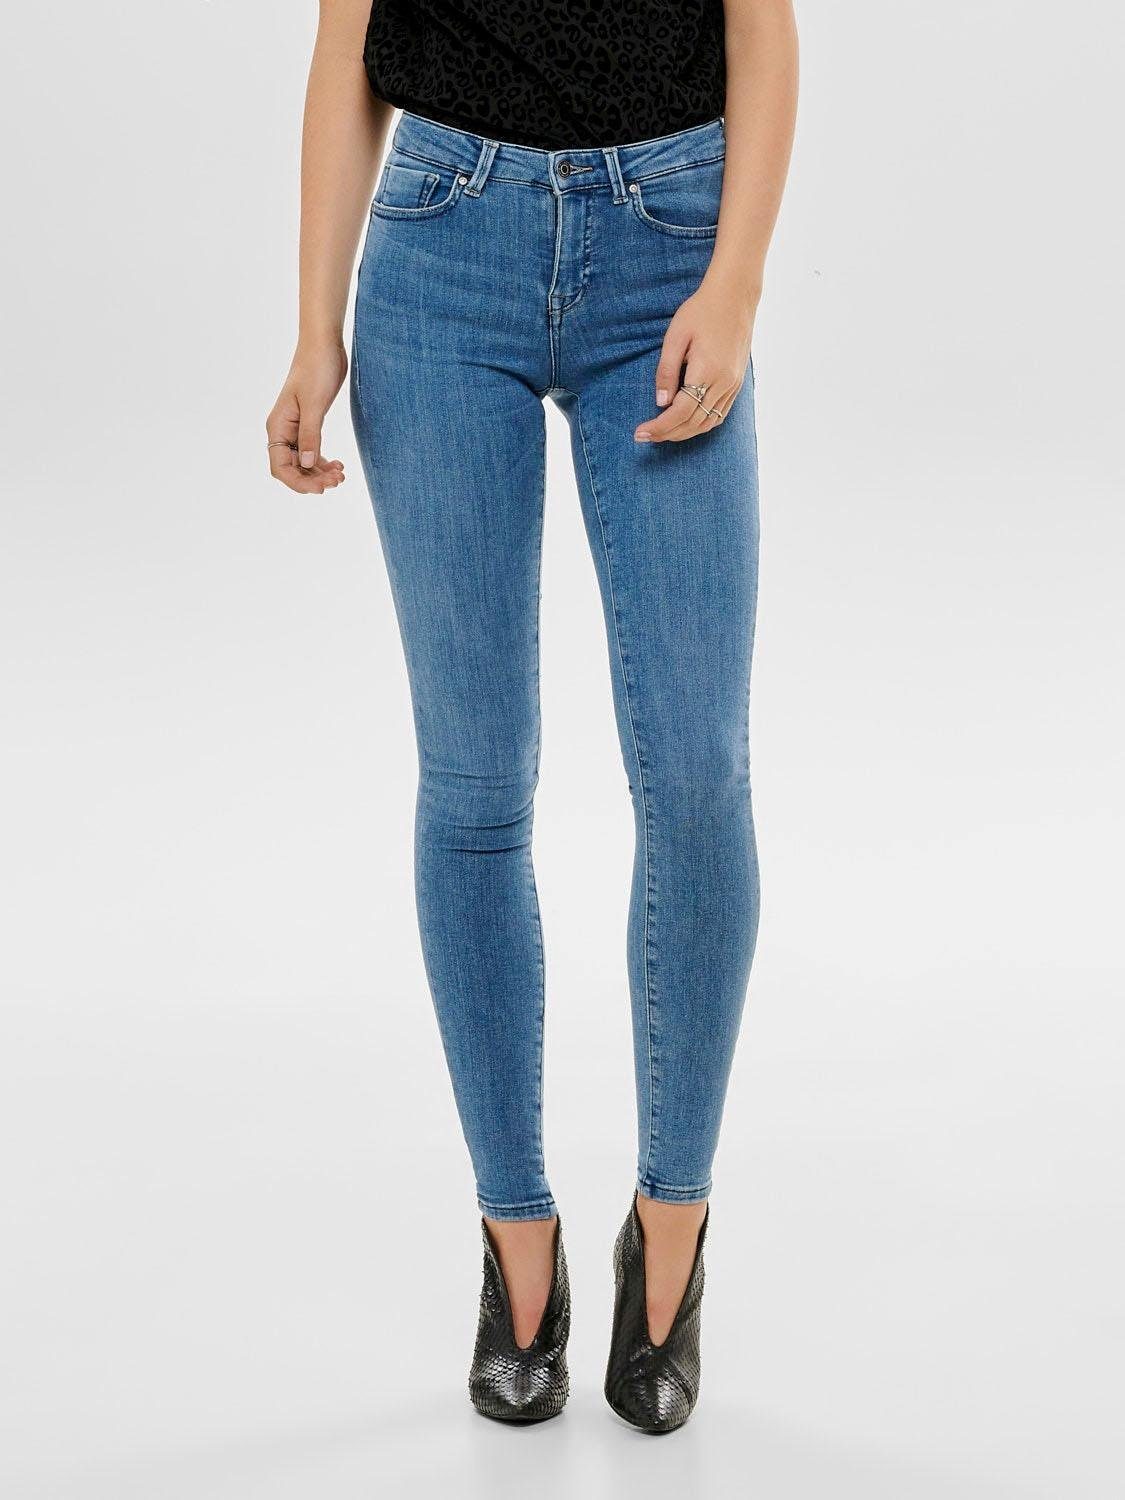 Only Skinny Fit Jeans Power Push Up Mit Push Up Effekt